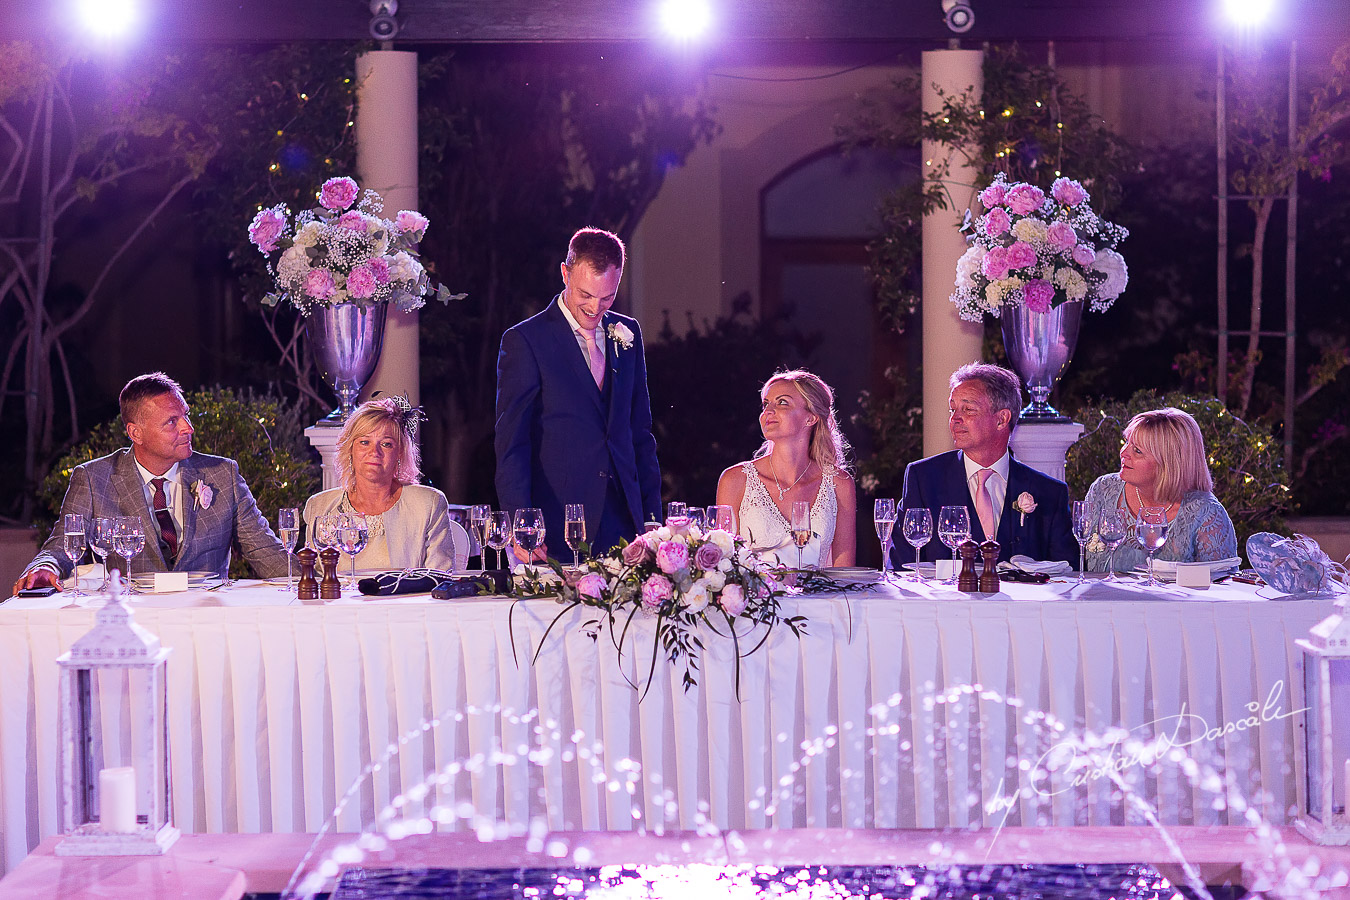 Wedding dinner moments captured by Cristian Dascalu at a wedding at The Aphrodite Hills Resort in Paphos, Cyprus.